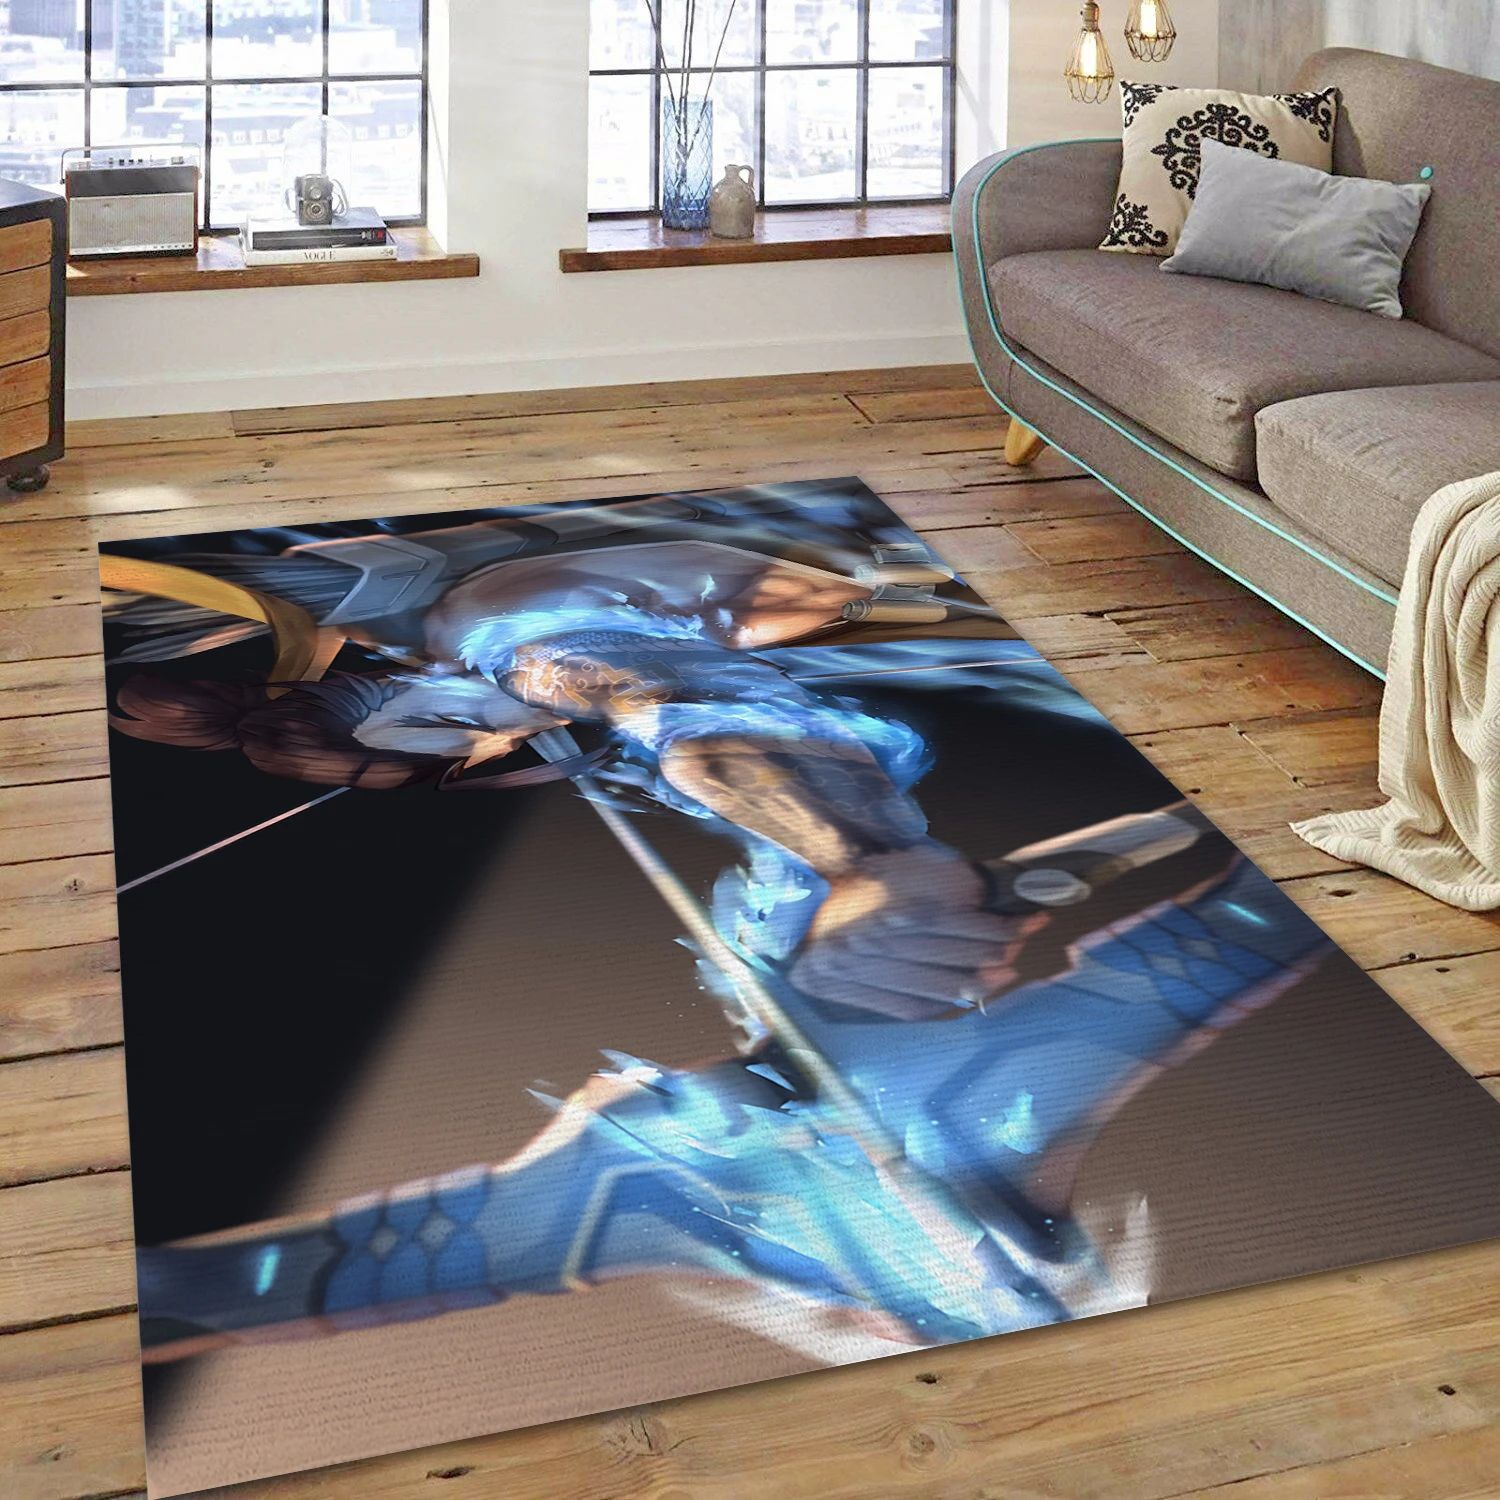 Hanzo Overwatch Gaming Area Rug, Living Room Rug - Family Gift US Decor - Indoor Outdoor Rugs